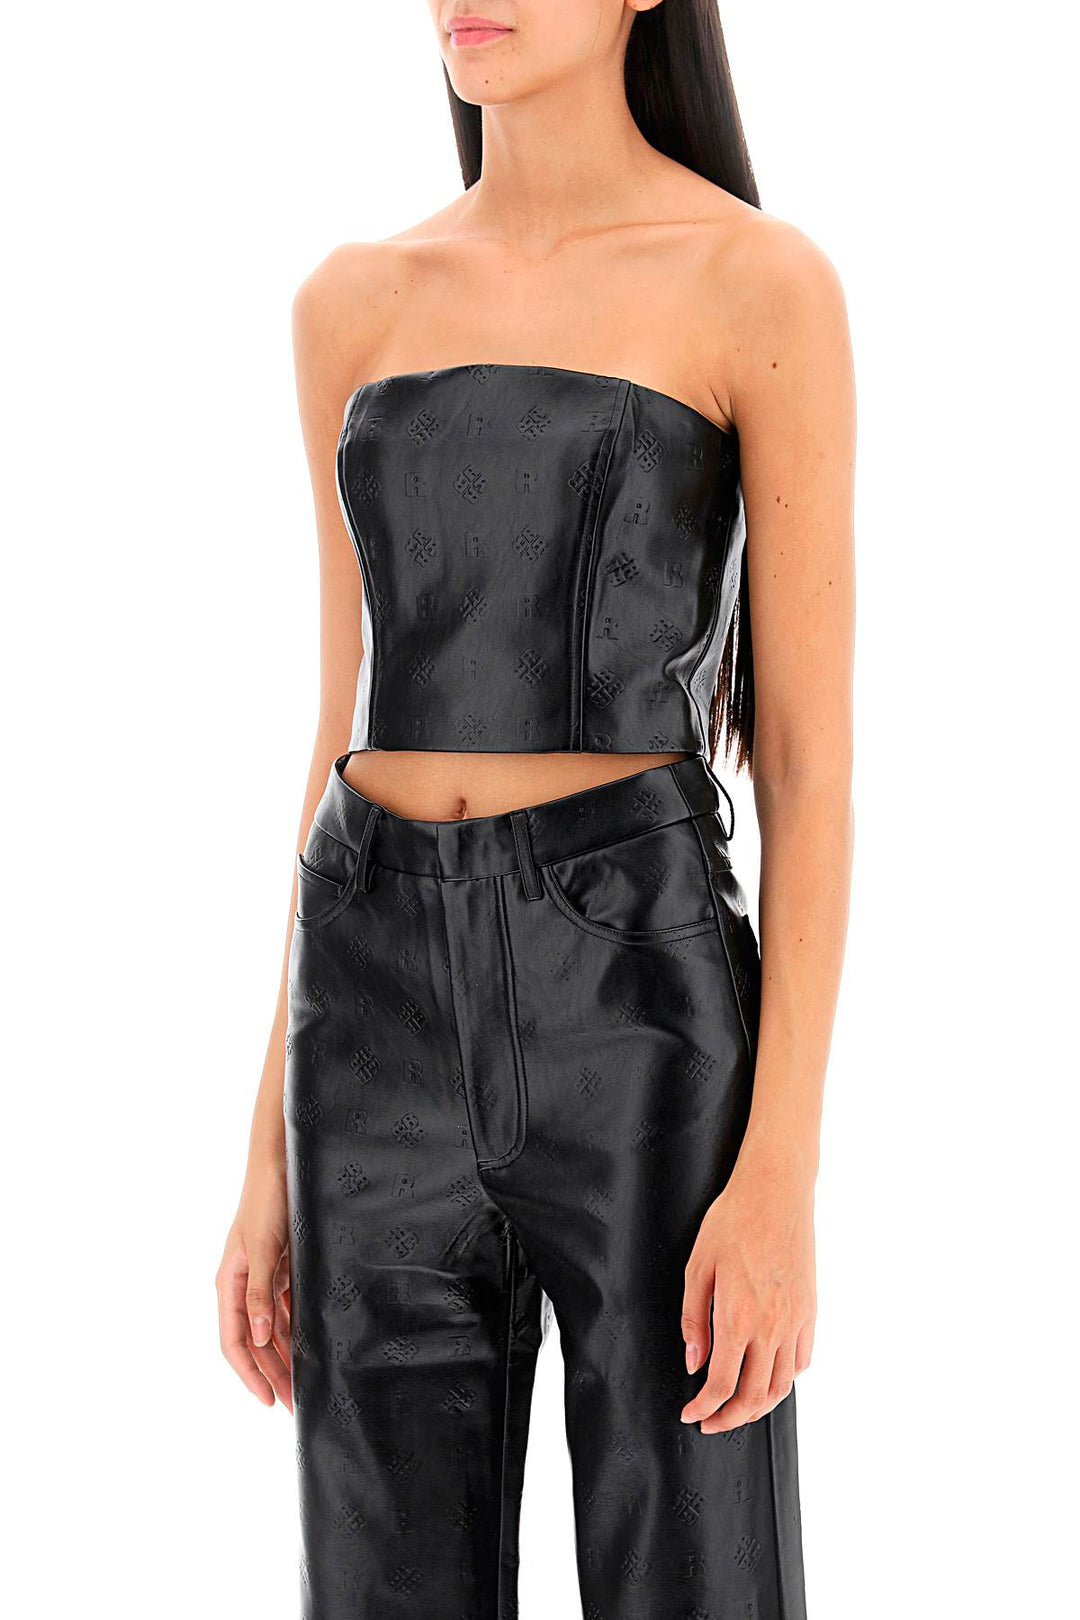 Rotate Faux Leather Cropped Top   Nero